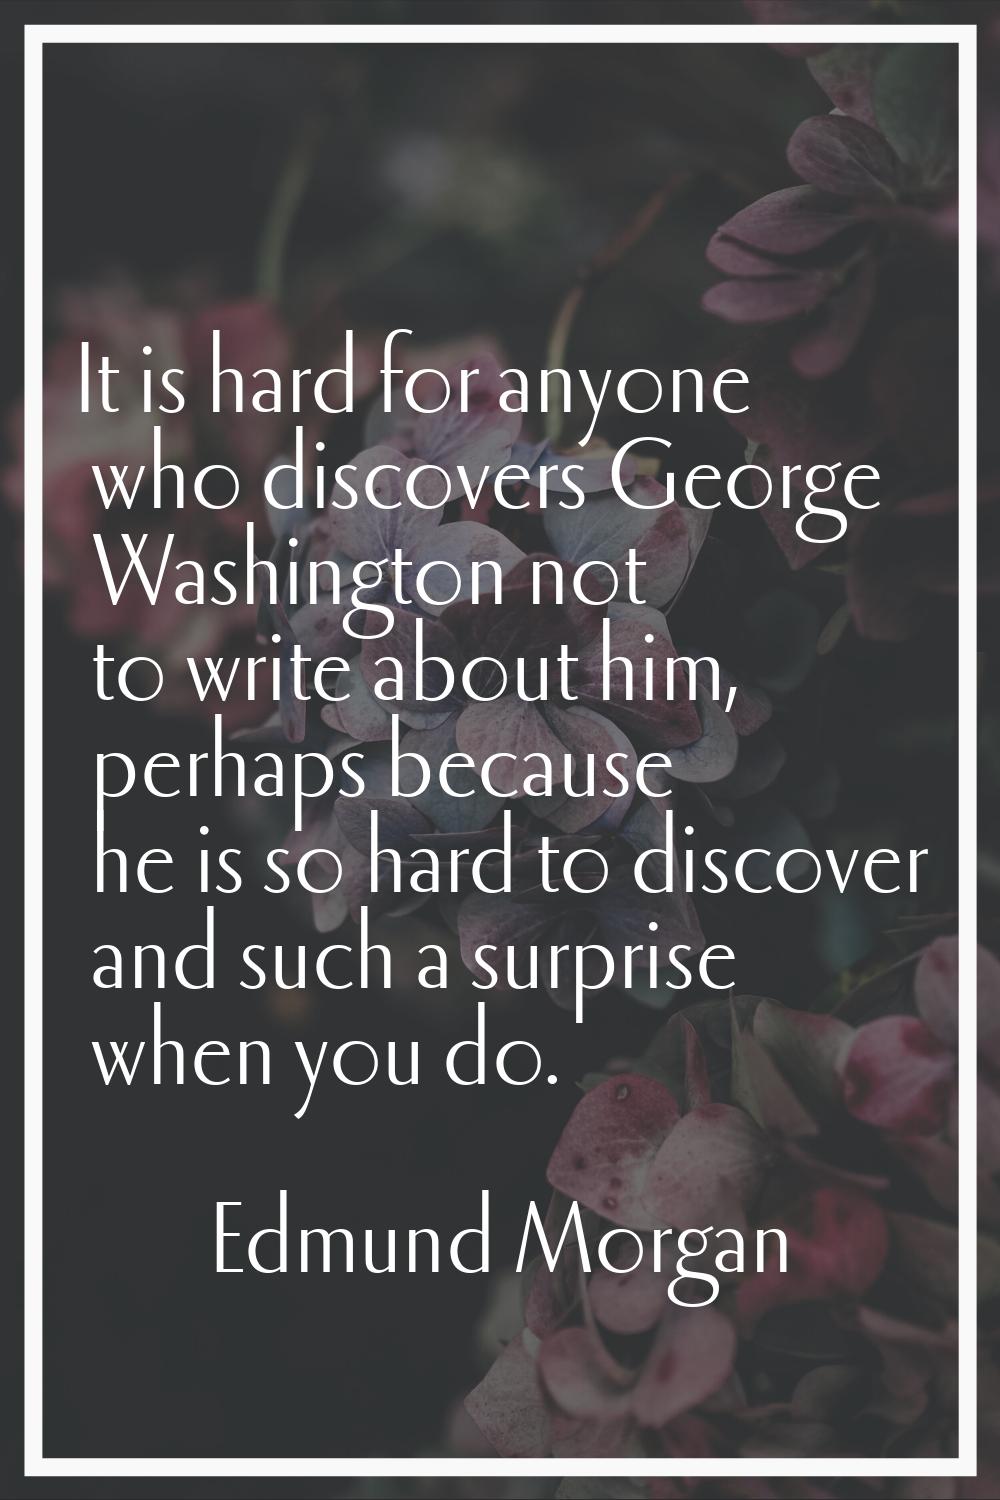 It is hard for anyone who discovers George Washington not to write about him, perhaps because he is